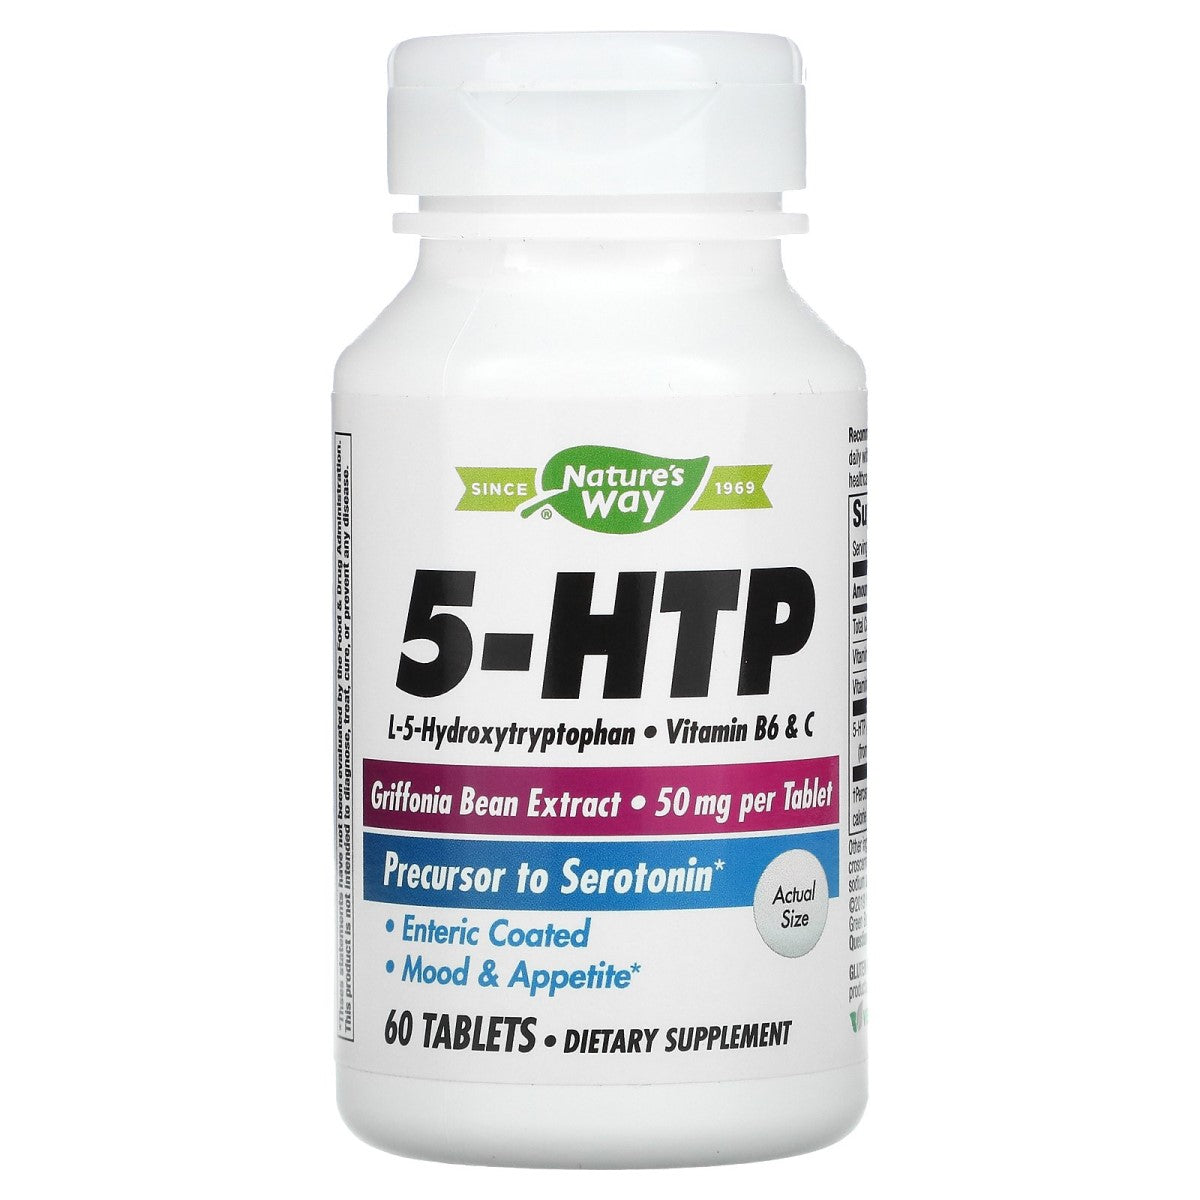 Primary image of 5-HTP